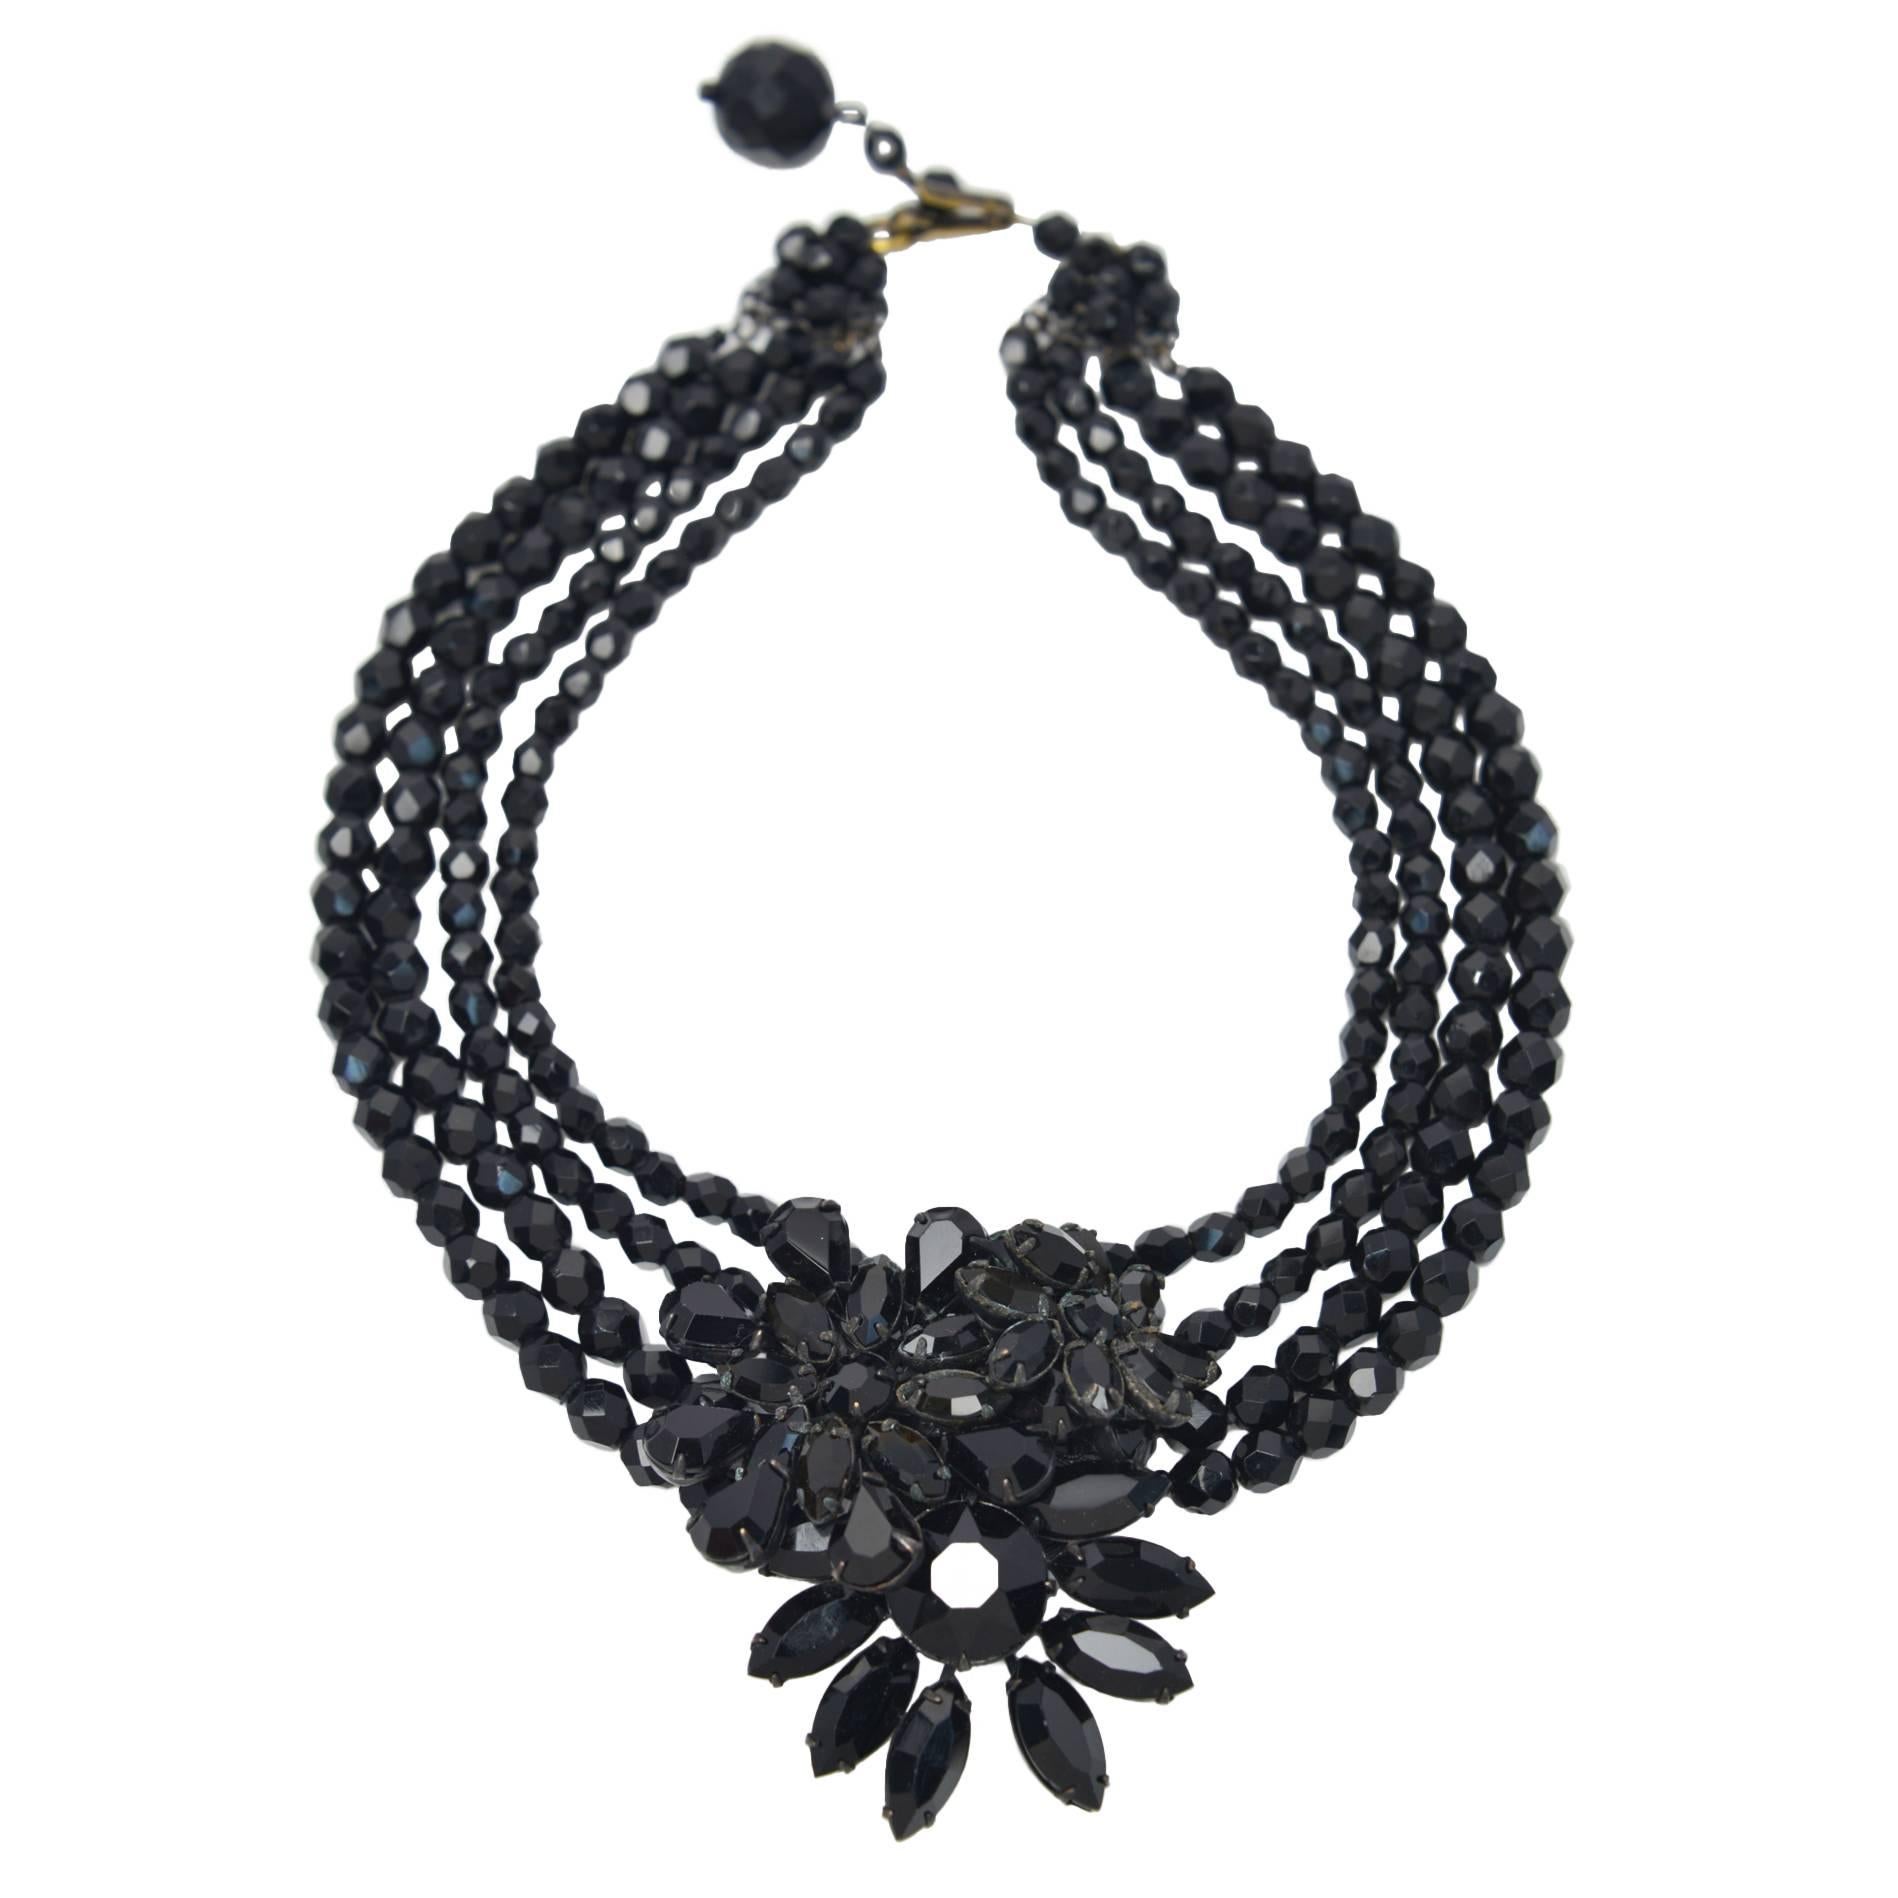 1950s Signed Miriam Haskell Black Beaded Necklace